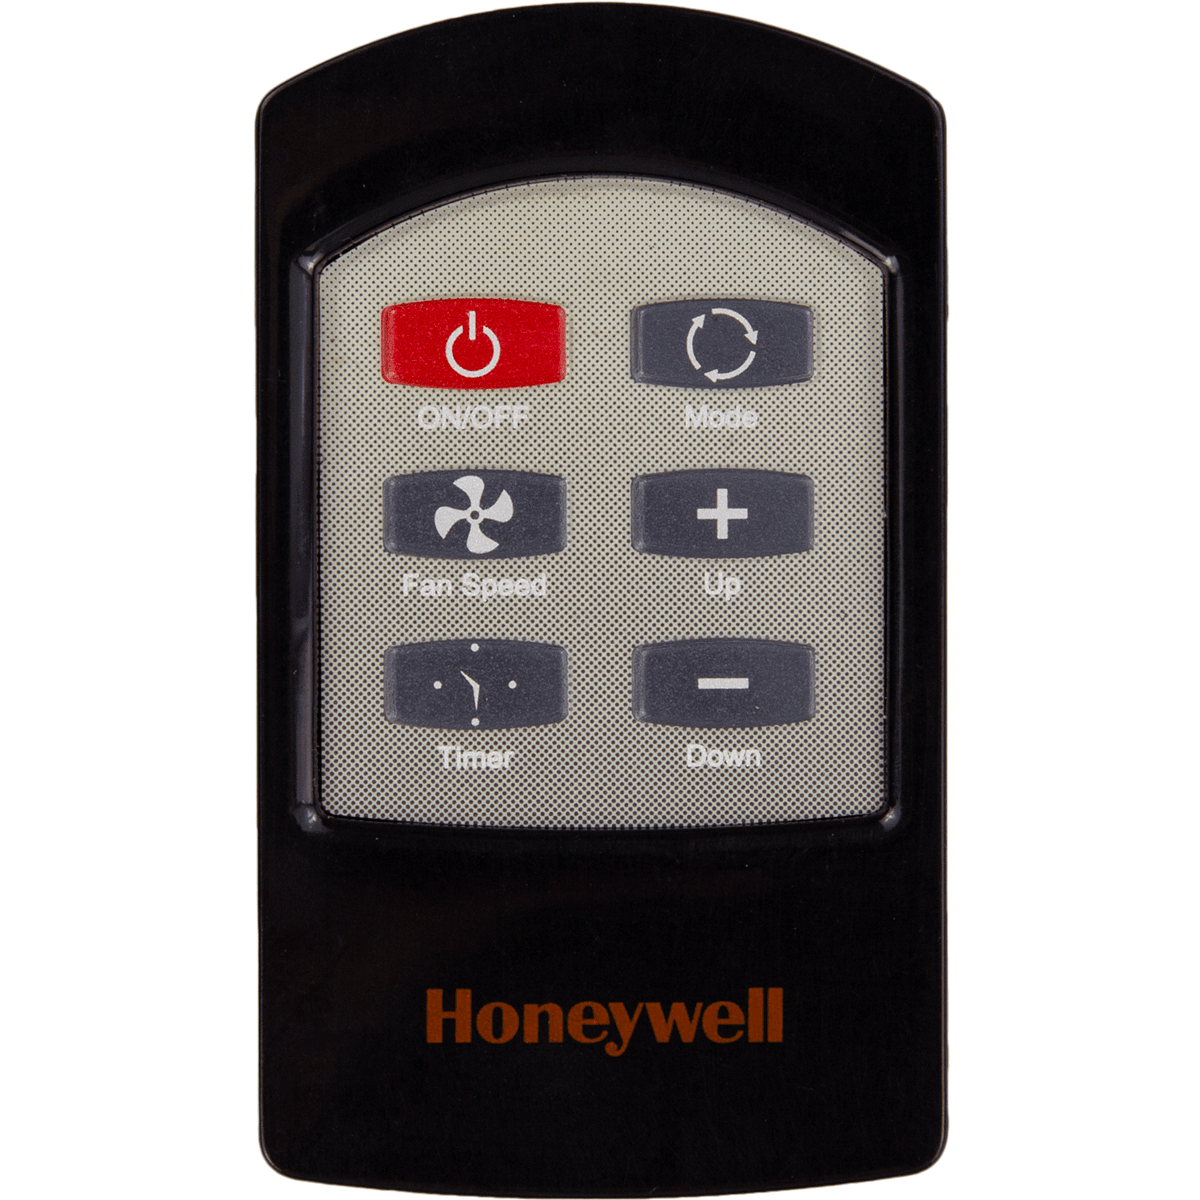 Honeywell Remote Control for MF Series Portable Air Conditioners - Black